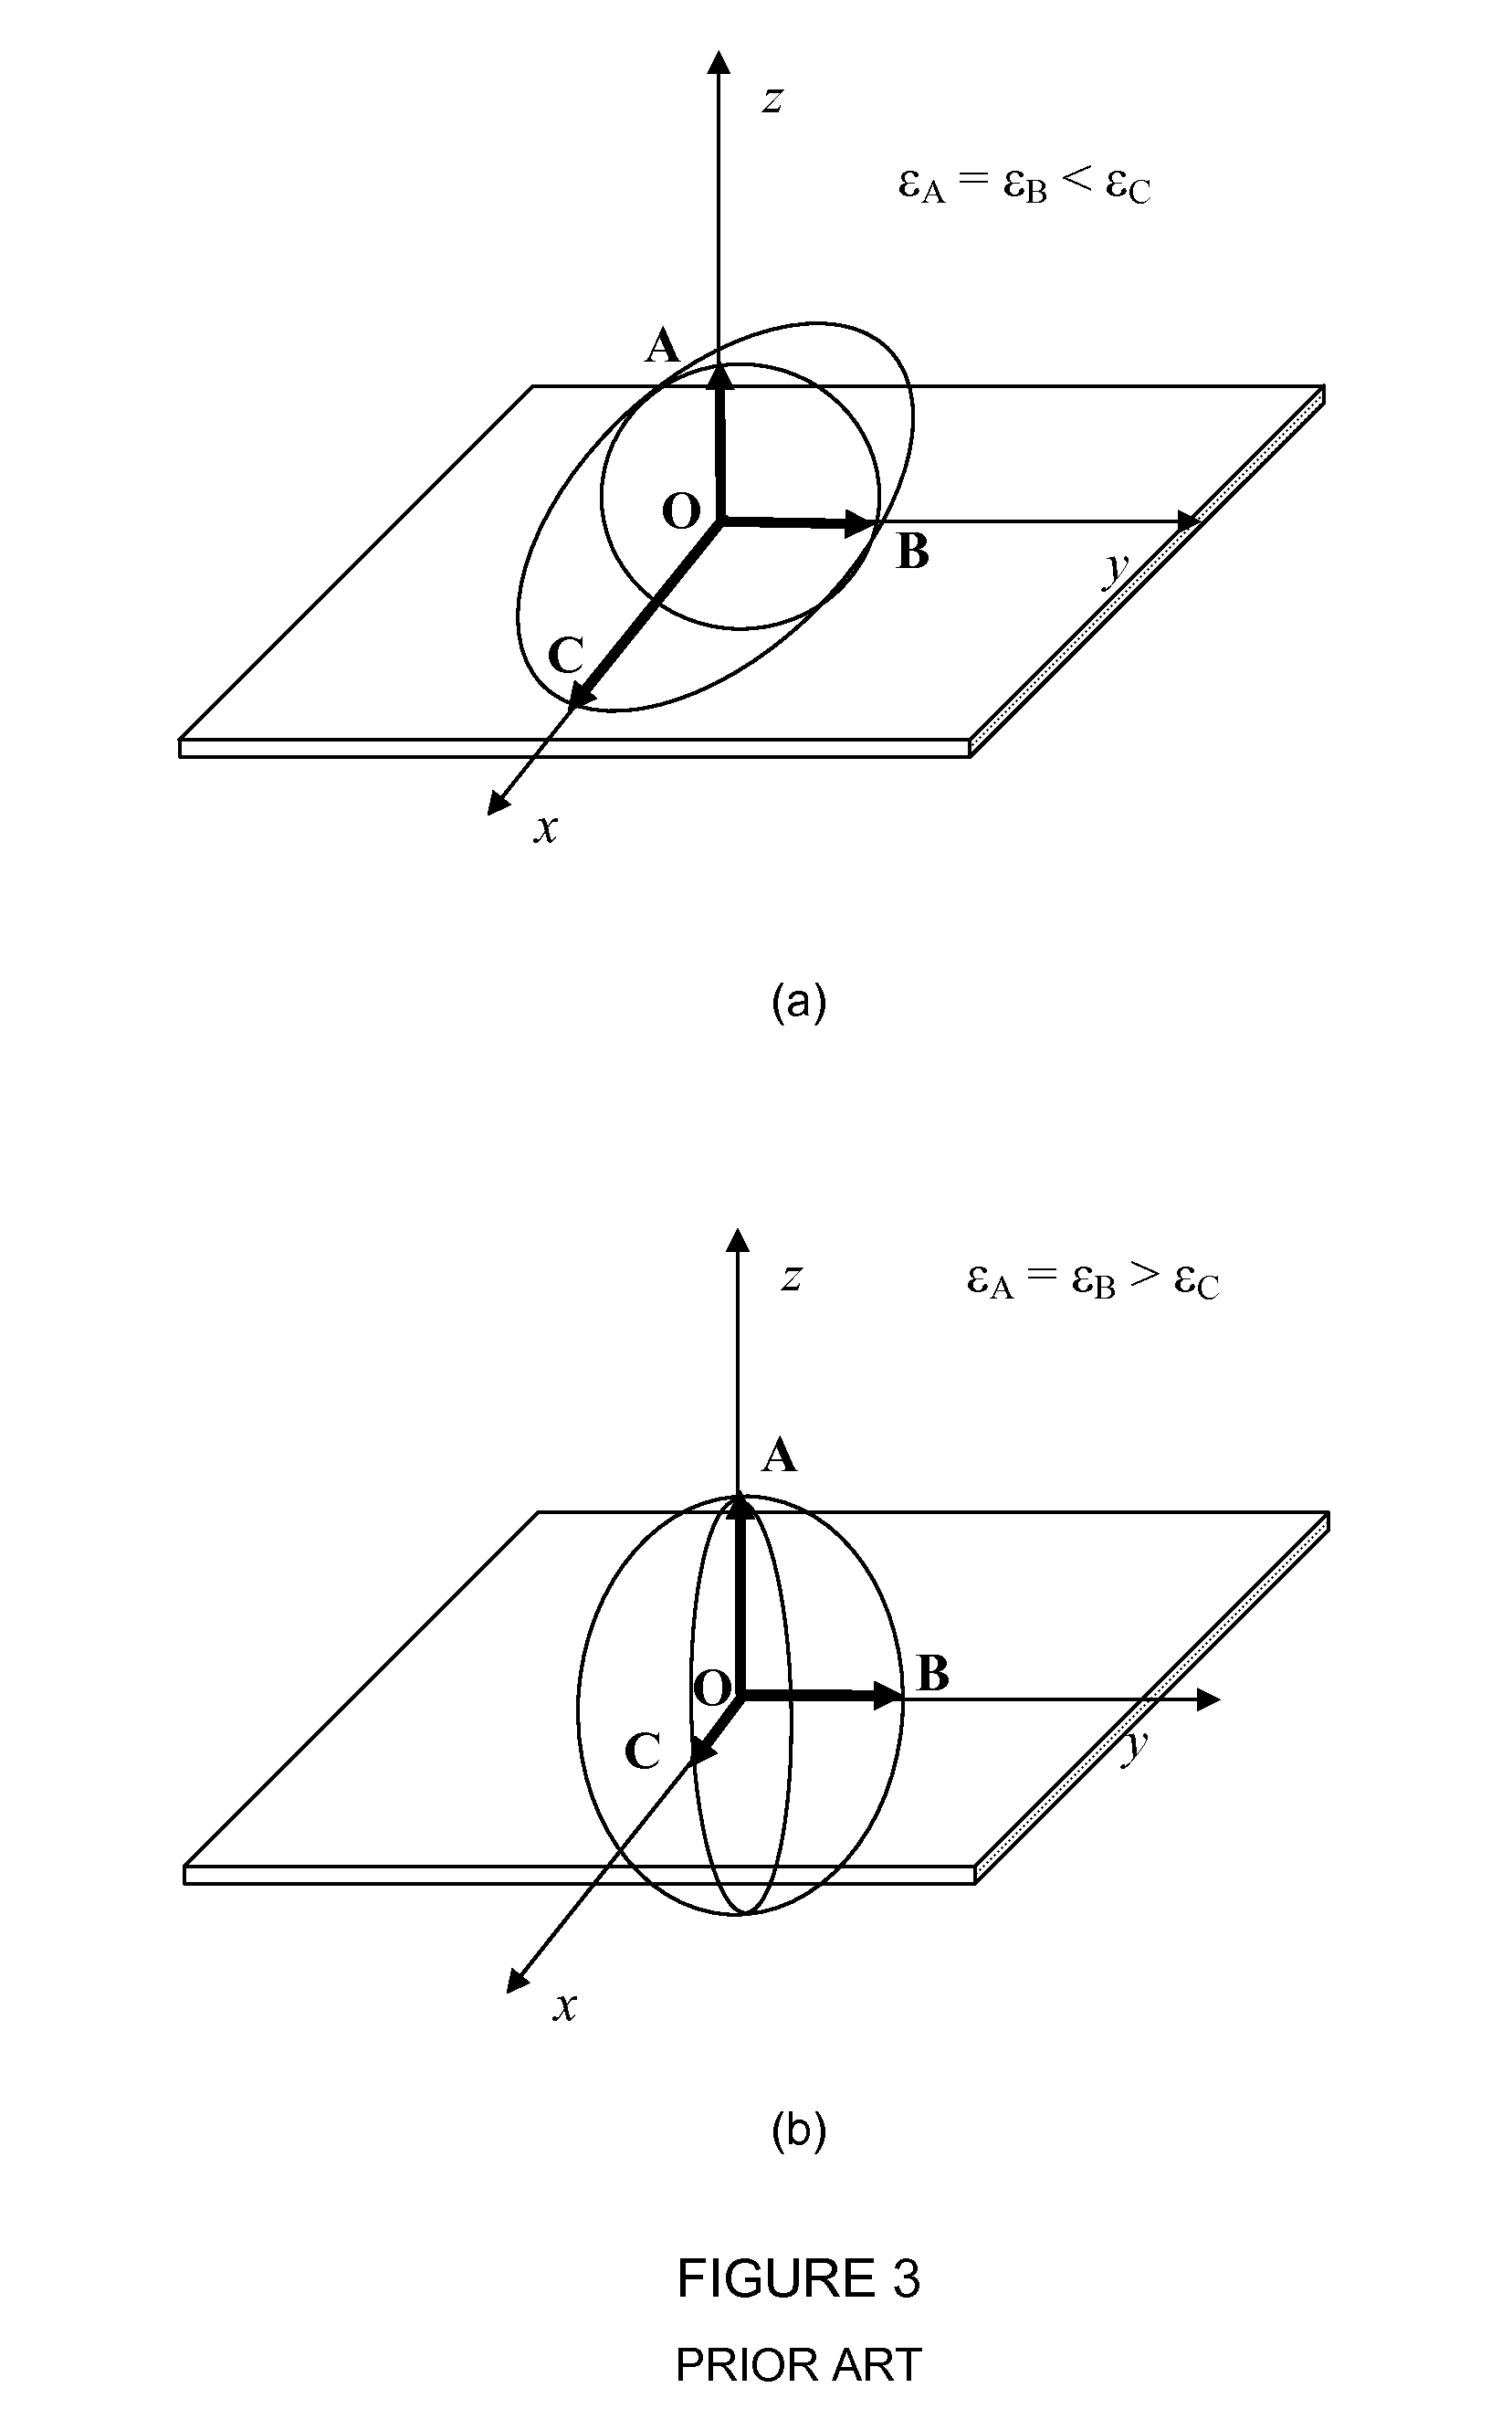 Color Liquid Crystal Display and Compensation Panel